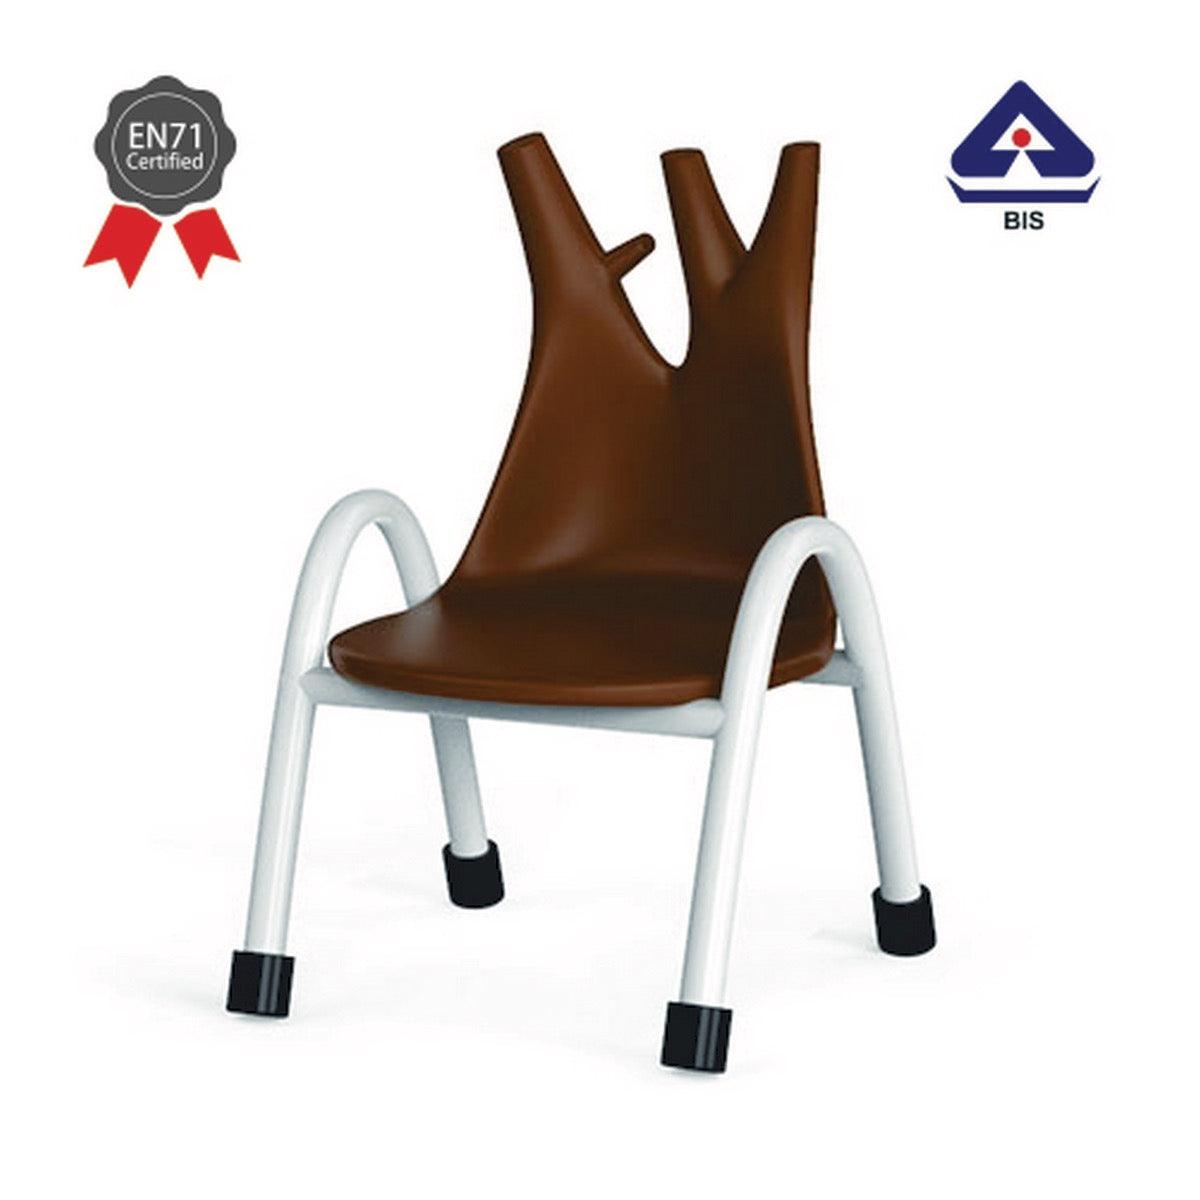 Ok Play Trunk Chair, Study Chair, Sturdy And Durable Chair, Plastic Chair, Perfect For Home, Creches And School, Brown, 2 to 4 Years, Height 8 Inches